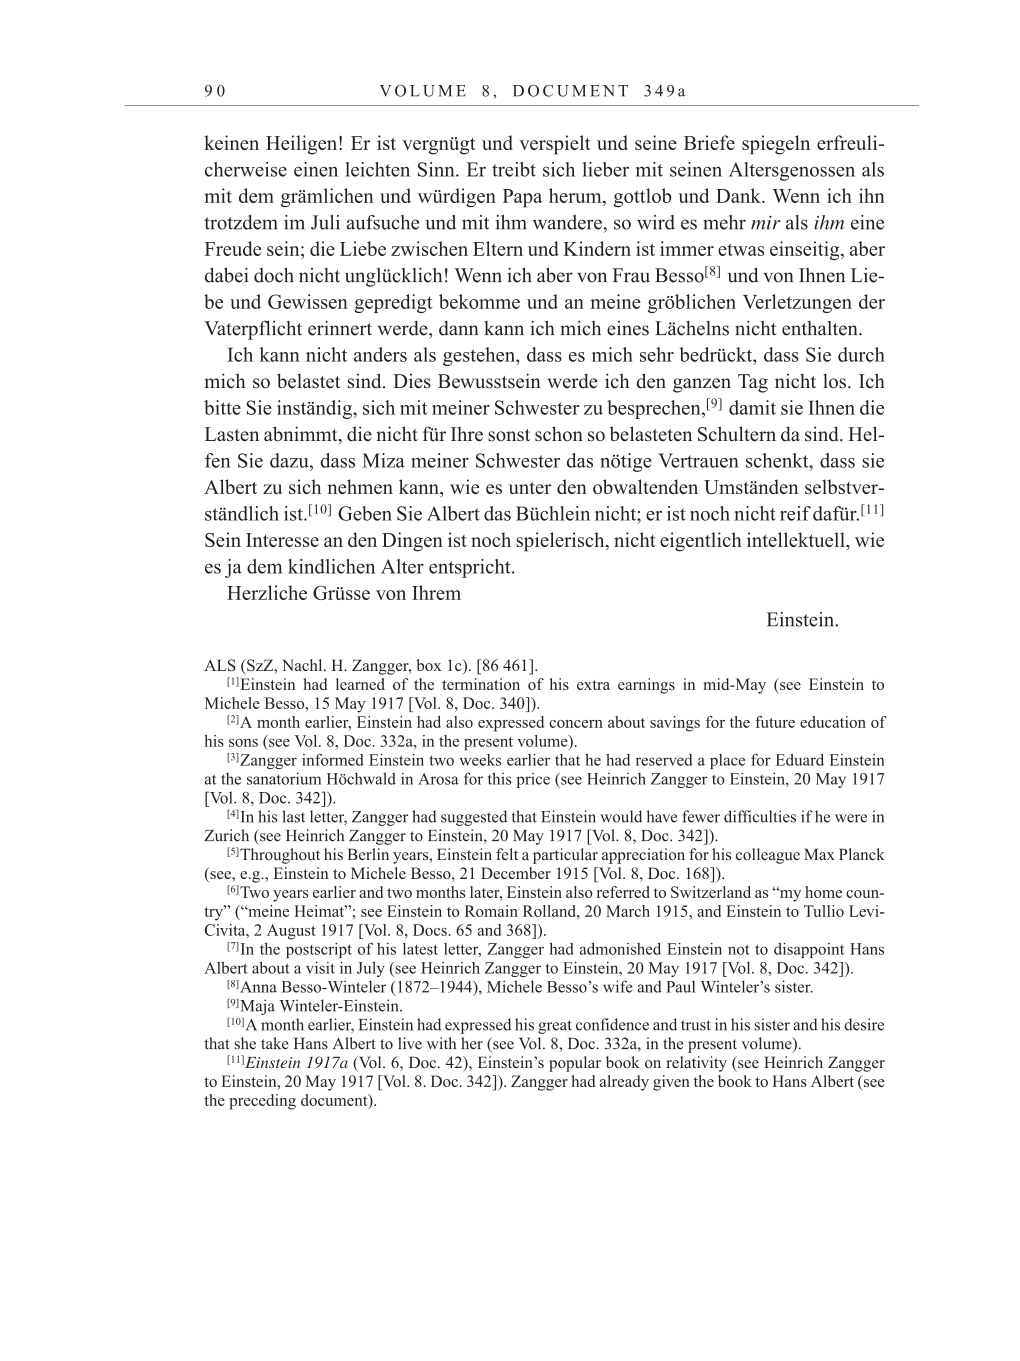 Volume 10: The Berlin Years: Correspondence May-December 1920 / Supplementary Correspondence 1909-1920 page 90